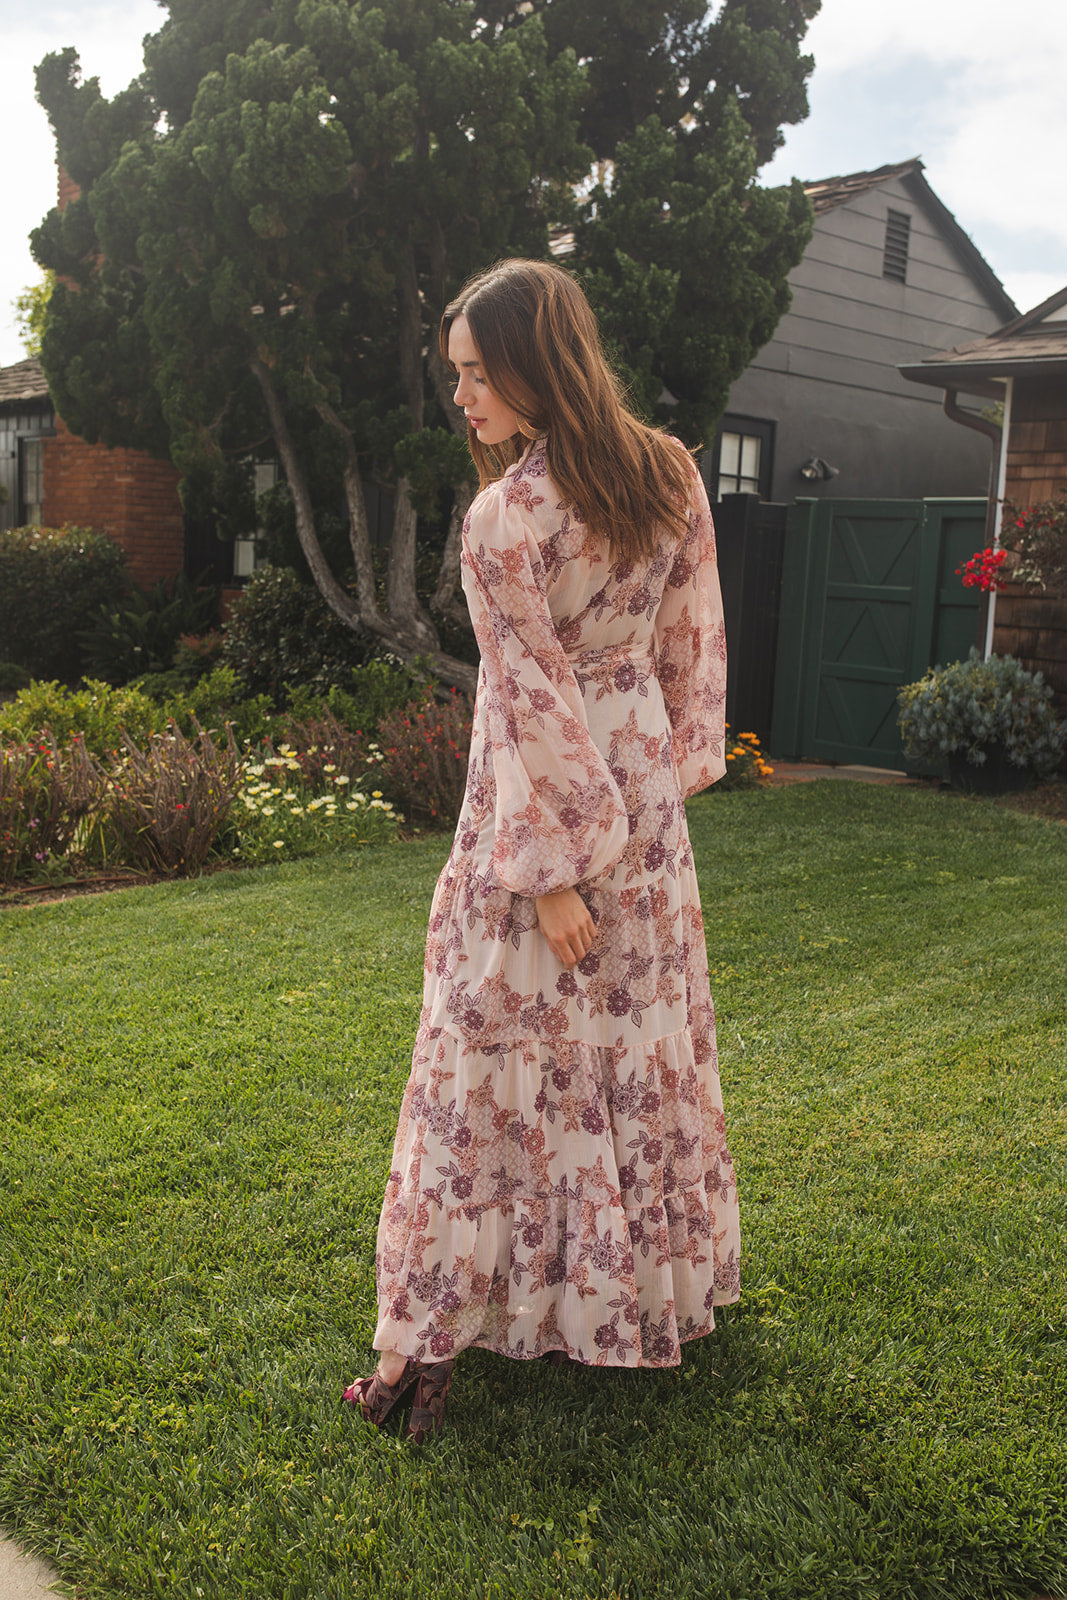 jennafer grace Henna Bookie Maxi Dress pale pink with purple mauve henna inspired floral print collared button up maxi dress cinched waist belt bishop sleeves boho bohemian hippie romantic whimsical summer holiday dress handmade in California USA